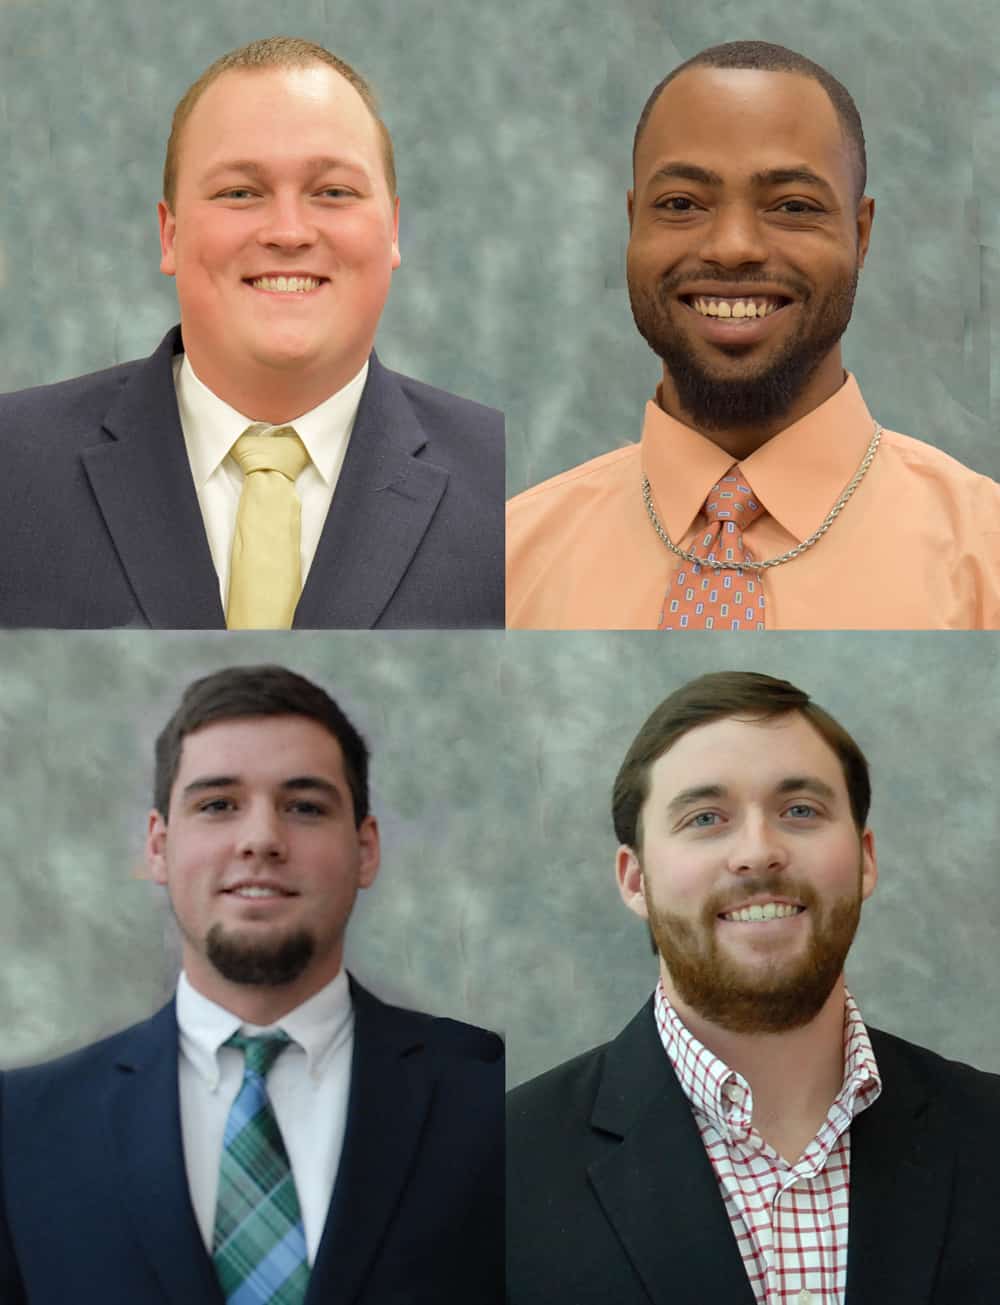 Clockwise from top left are SGTC GOAL semi-finalists Gage Greene, Racarda Blackmon, Russell Wright, and Christopher McGee. These four finalists will interview with a selection committee, comprised of community leaders, and one winner will be selected to compete for the statewide GOAL title.